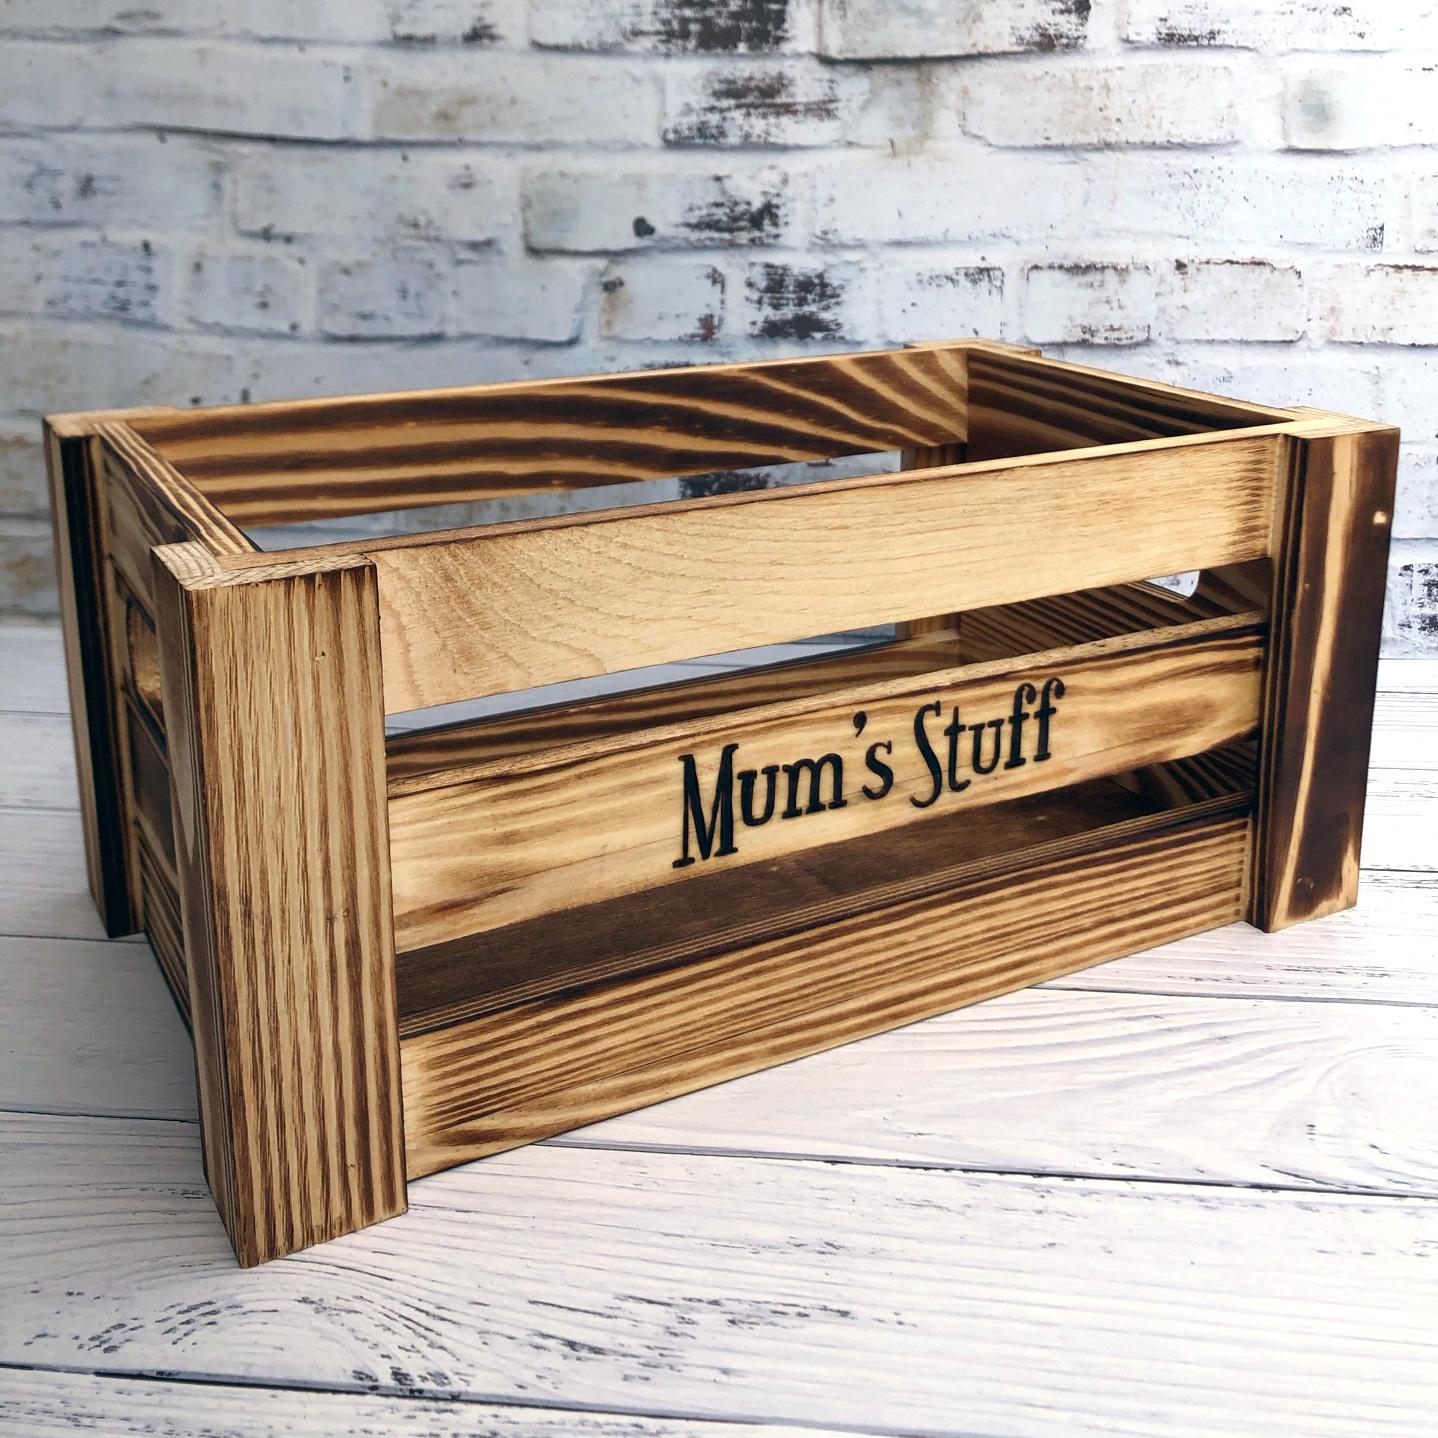 Mother's  Stuff crate